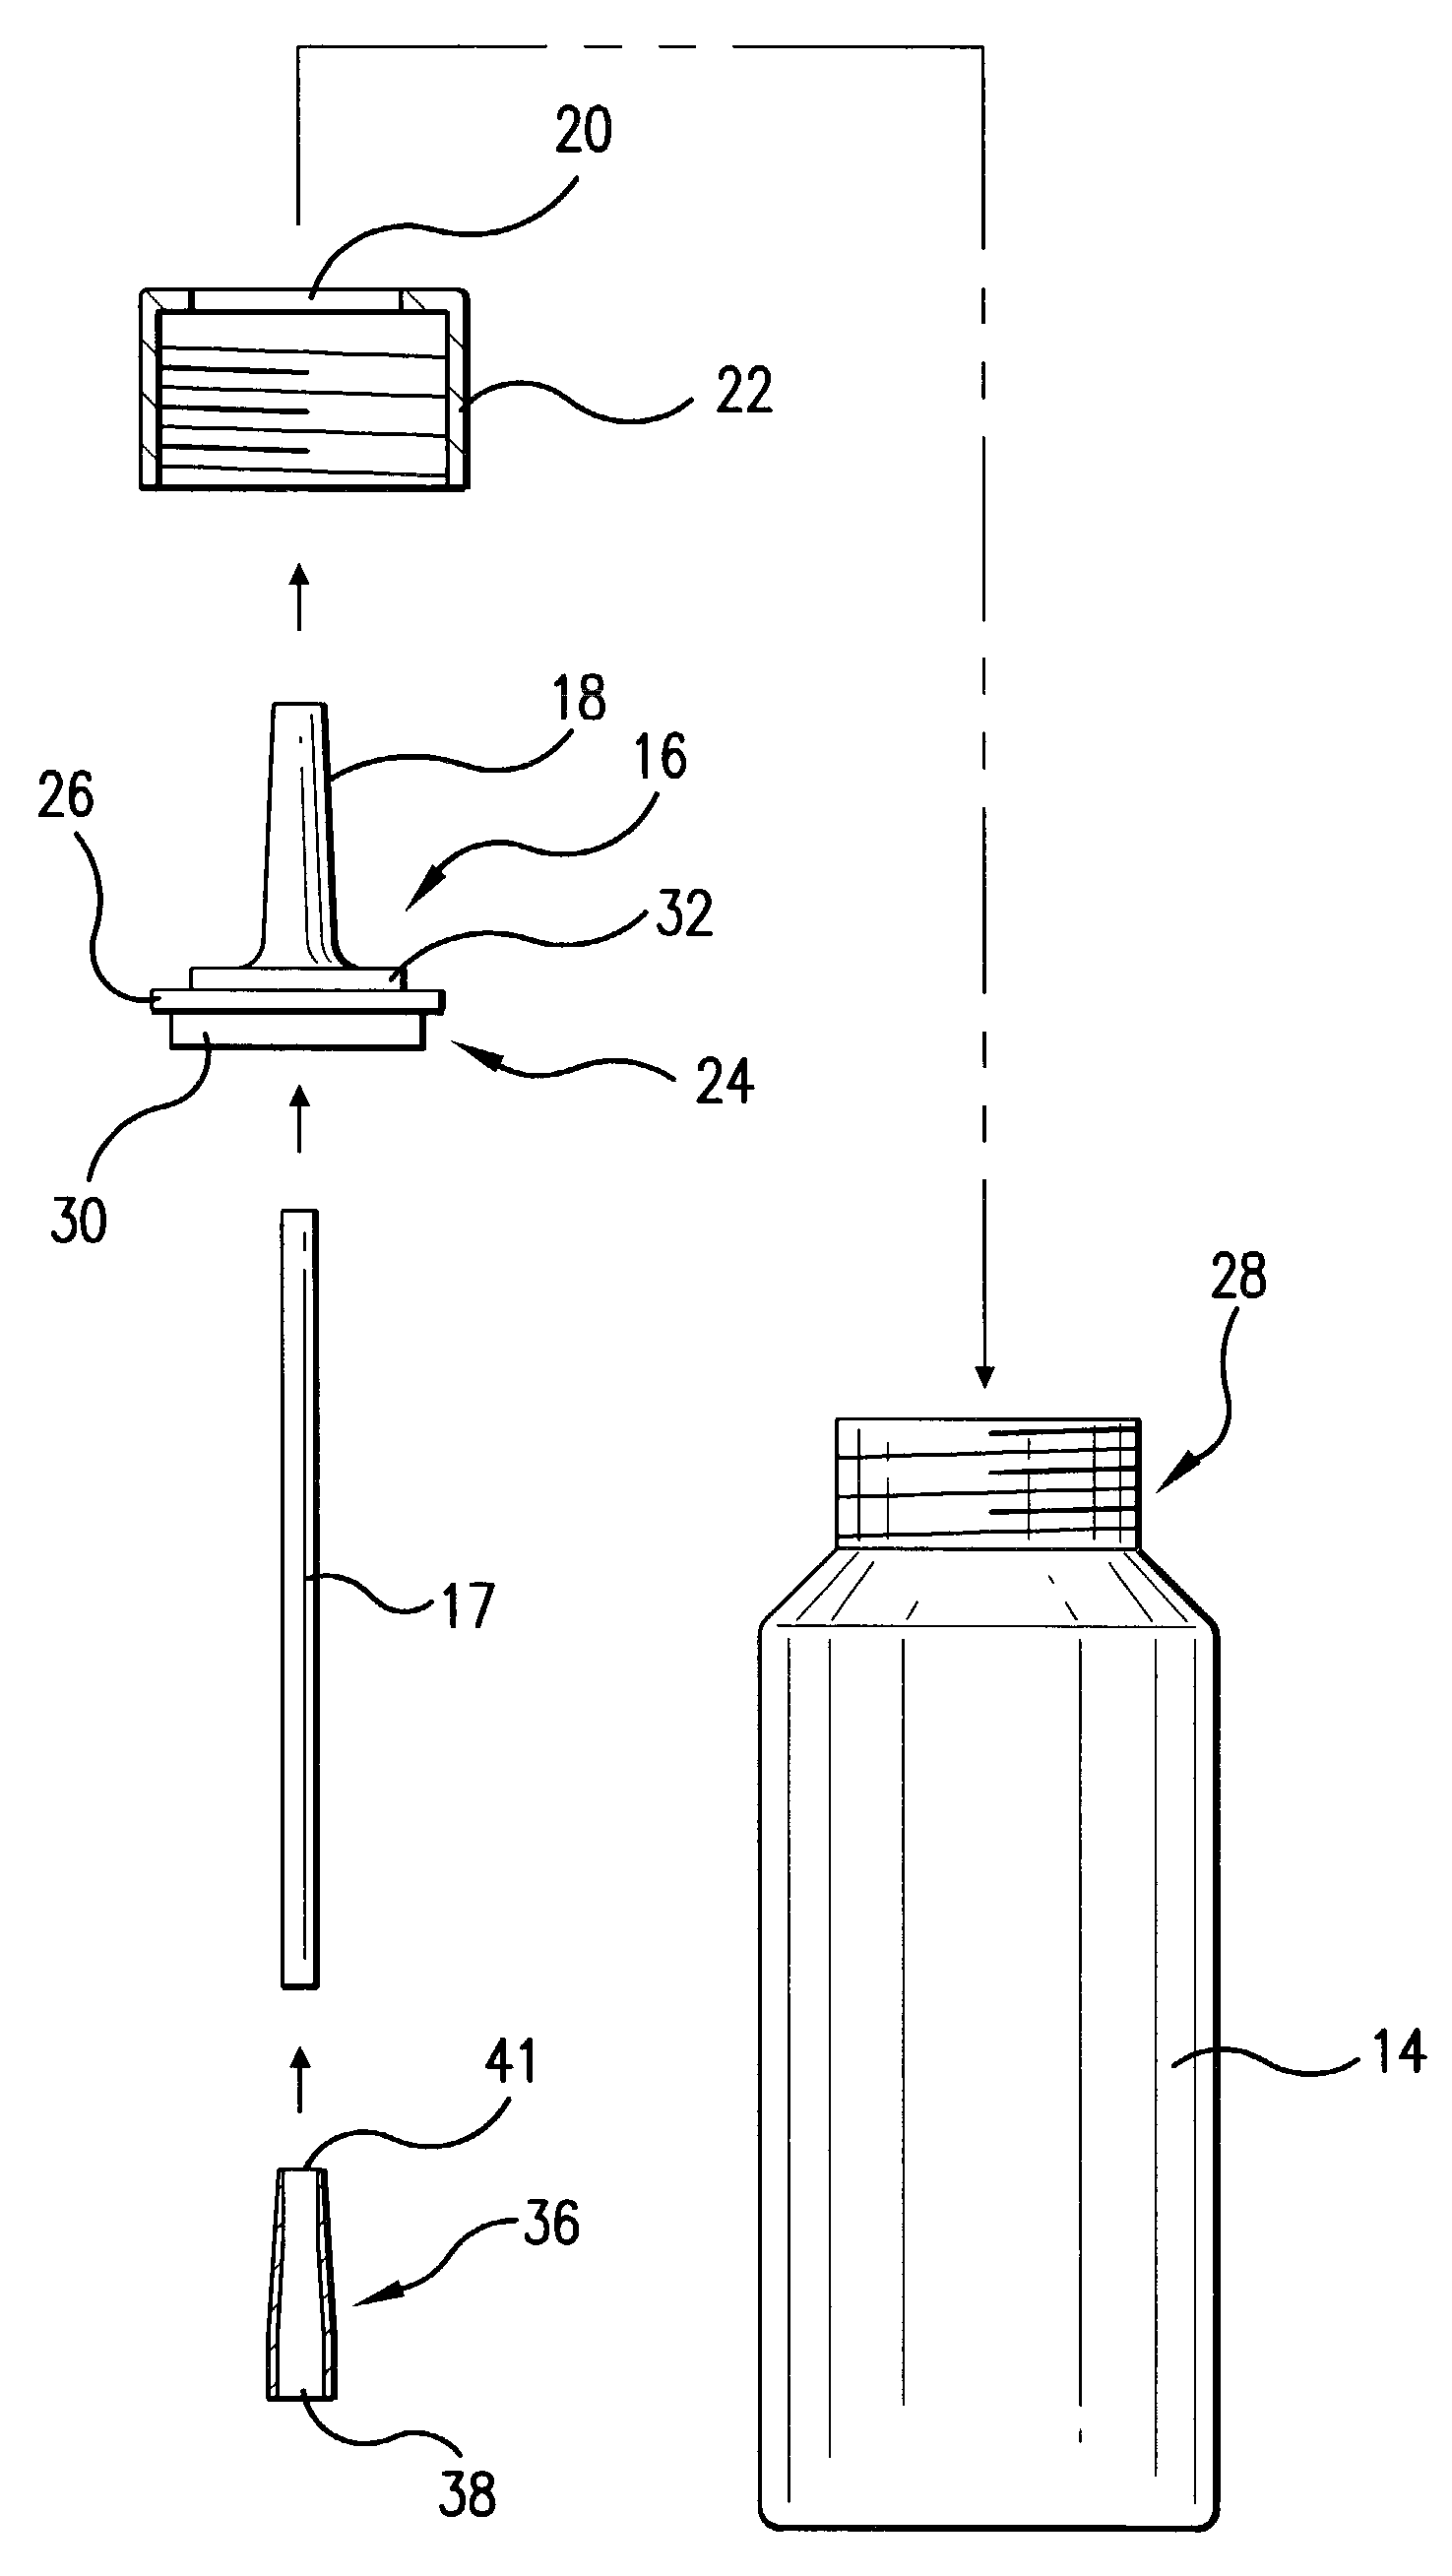 Squeezable, fillable feeding device